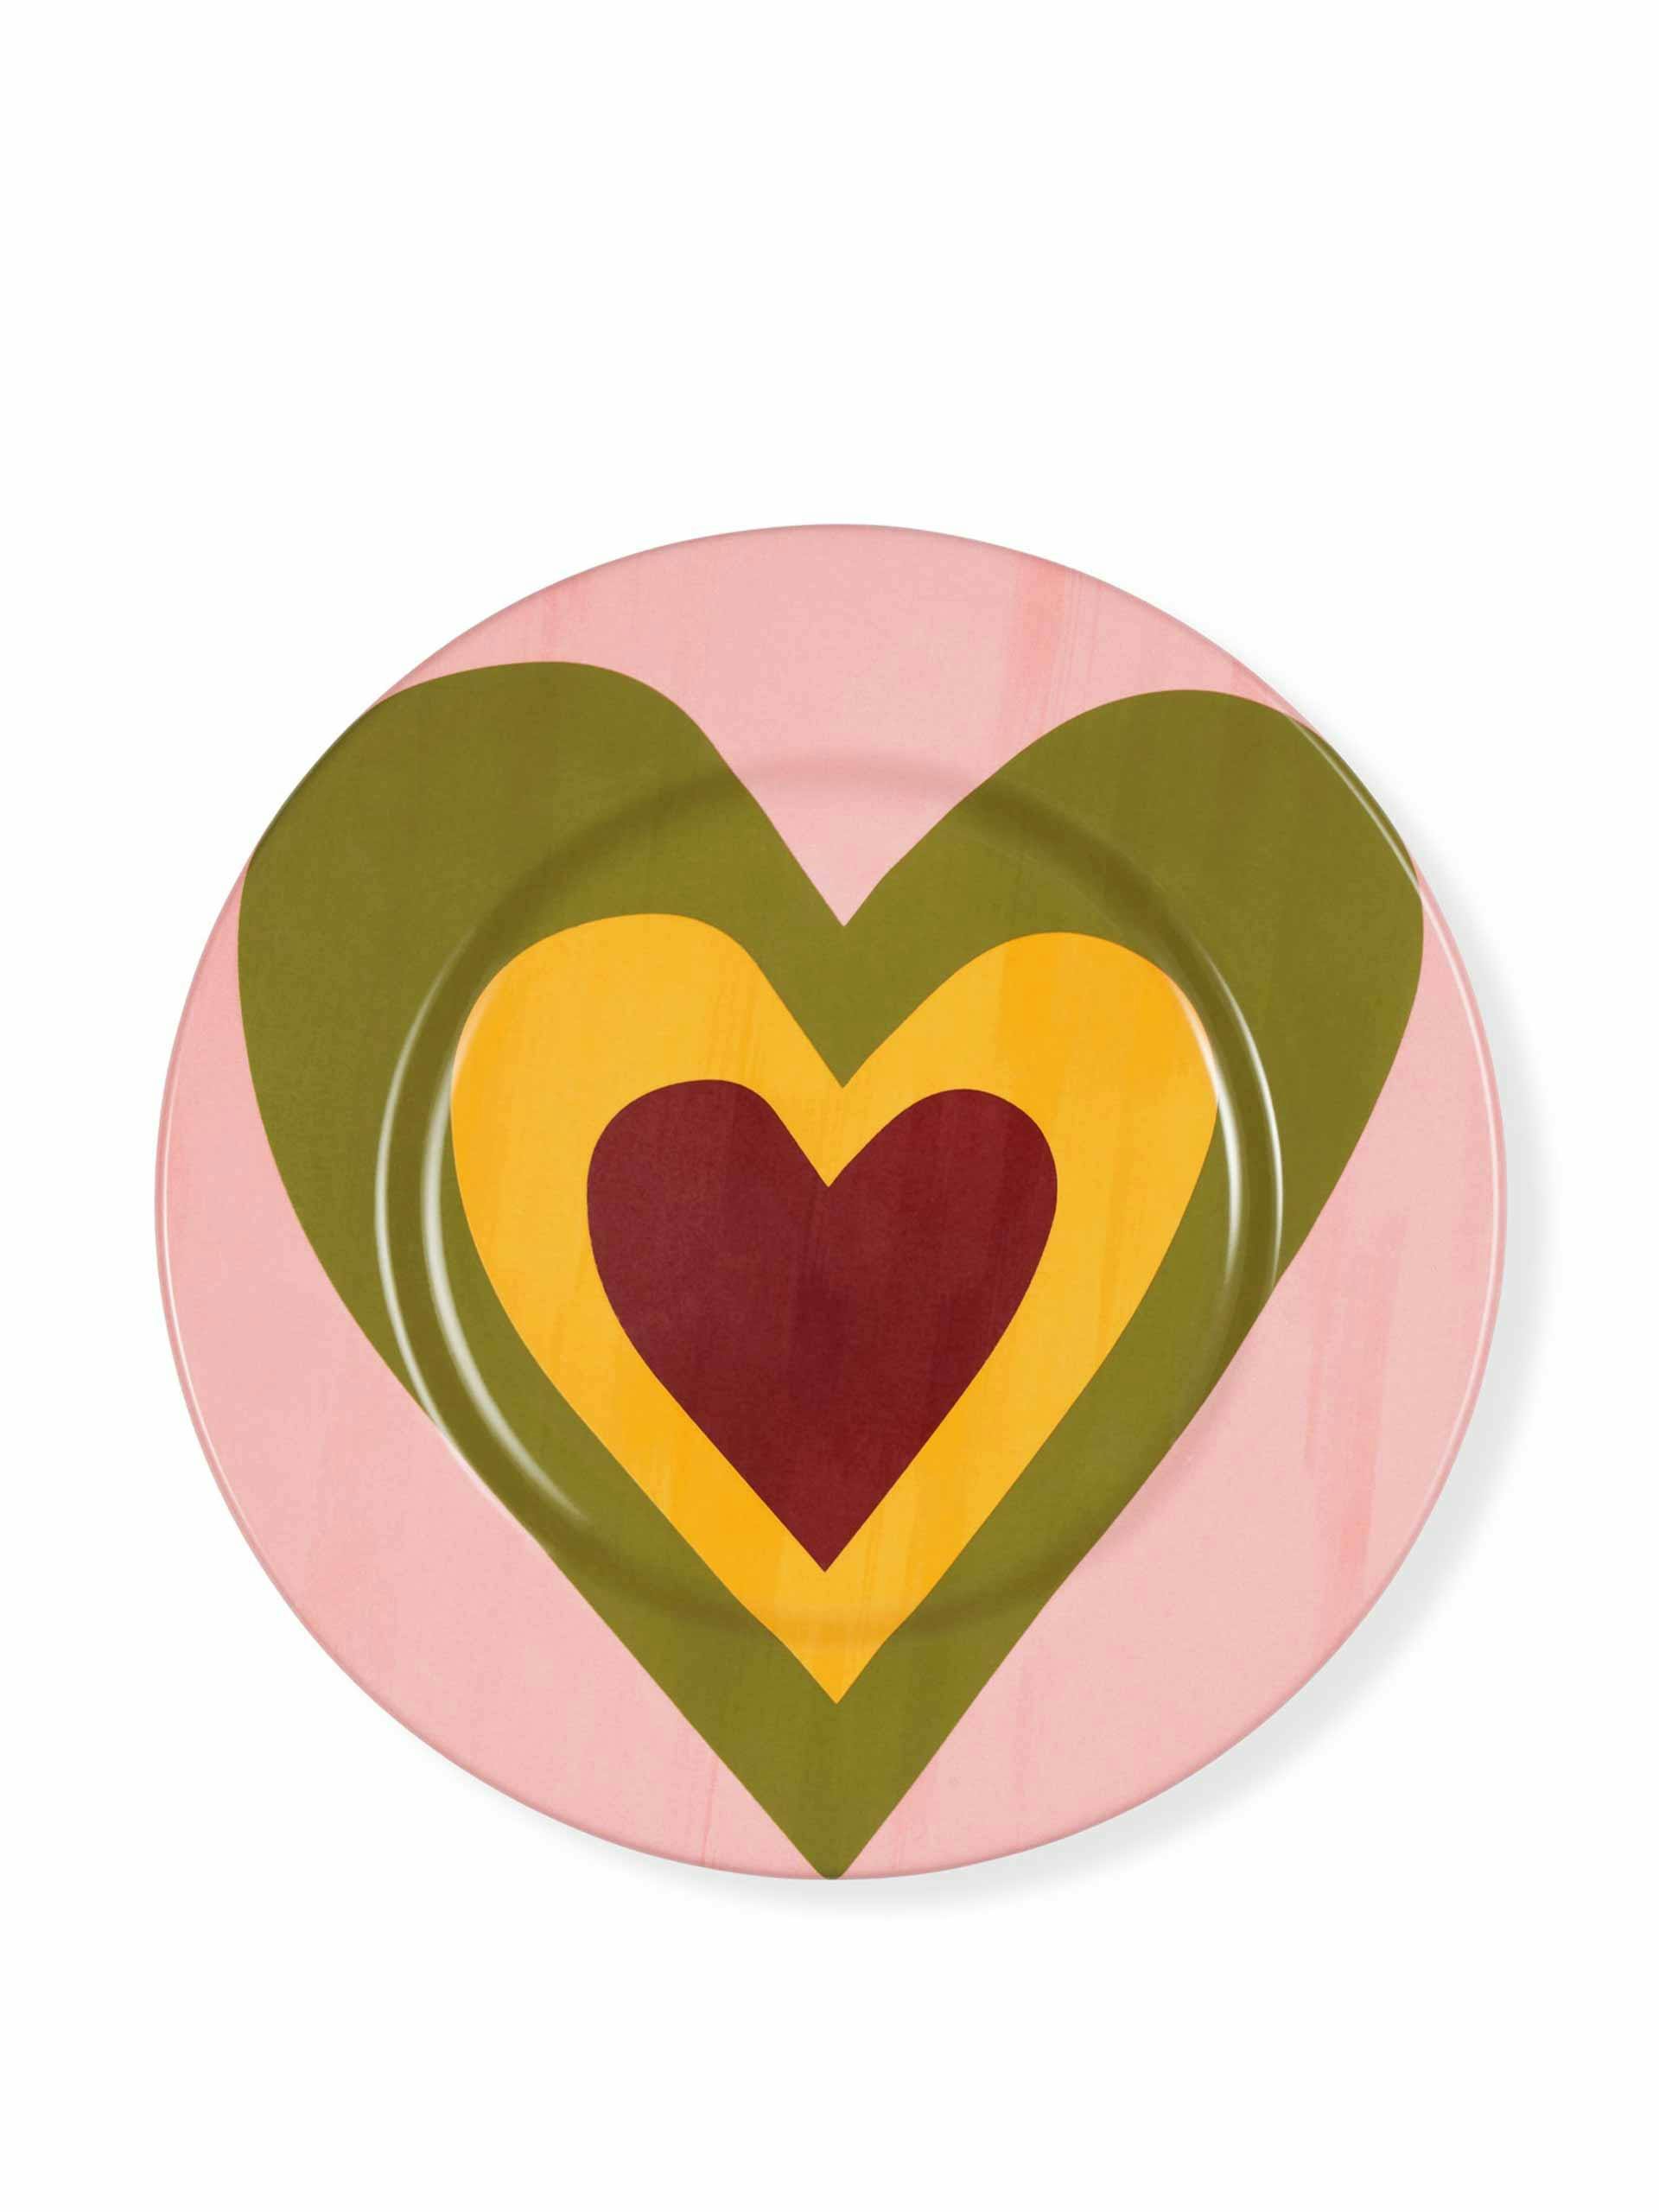 Heart dinner plate in rose pink and avocado green